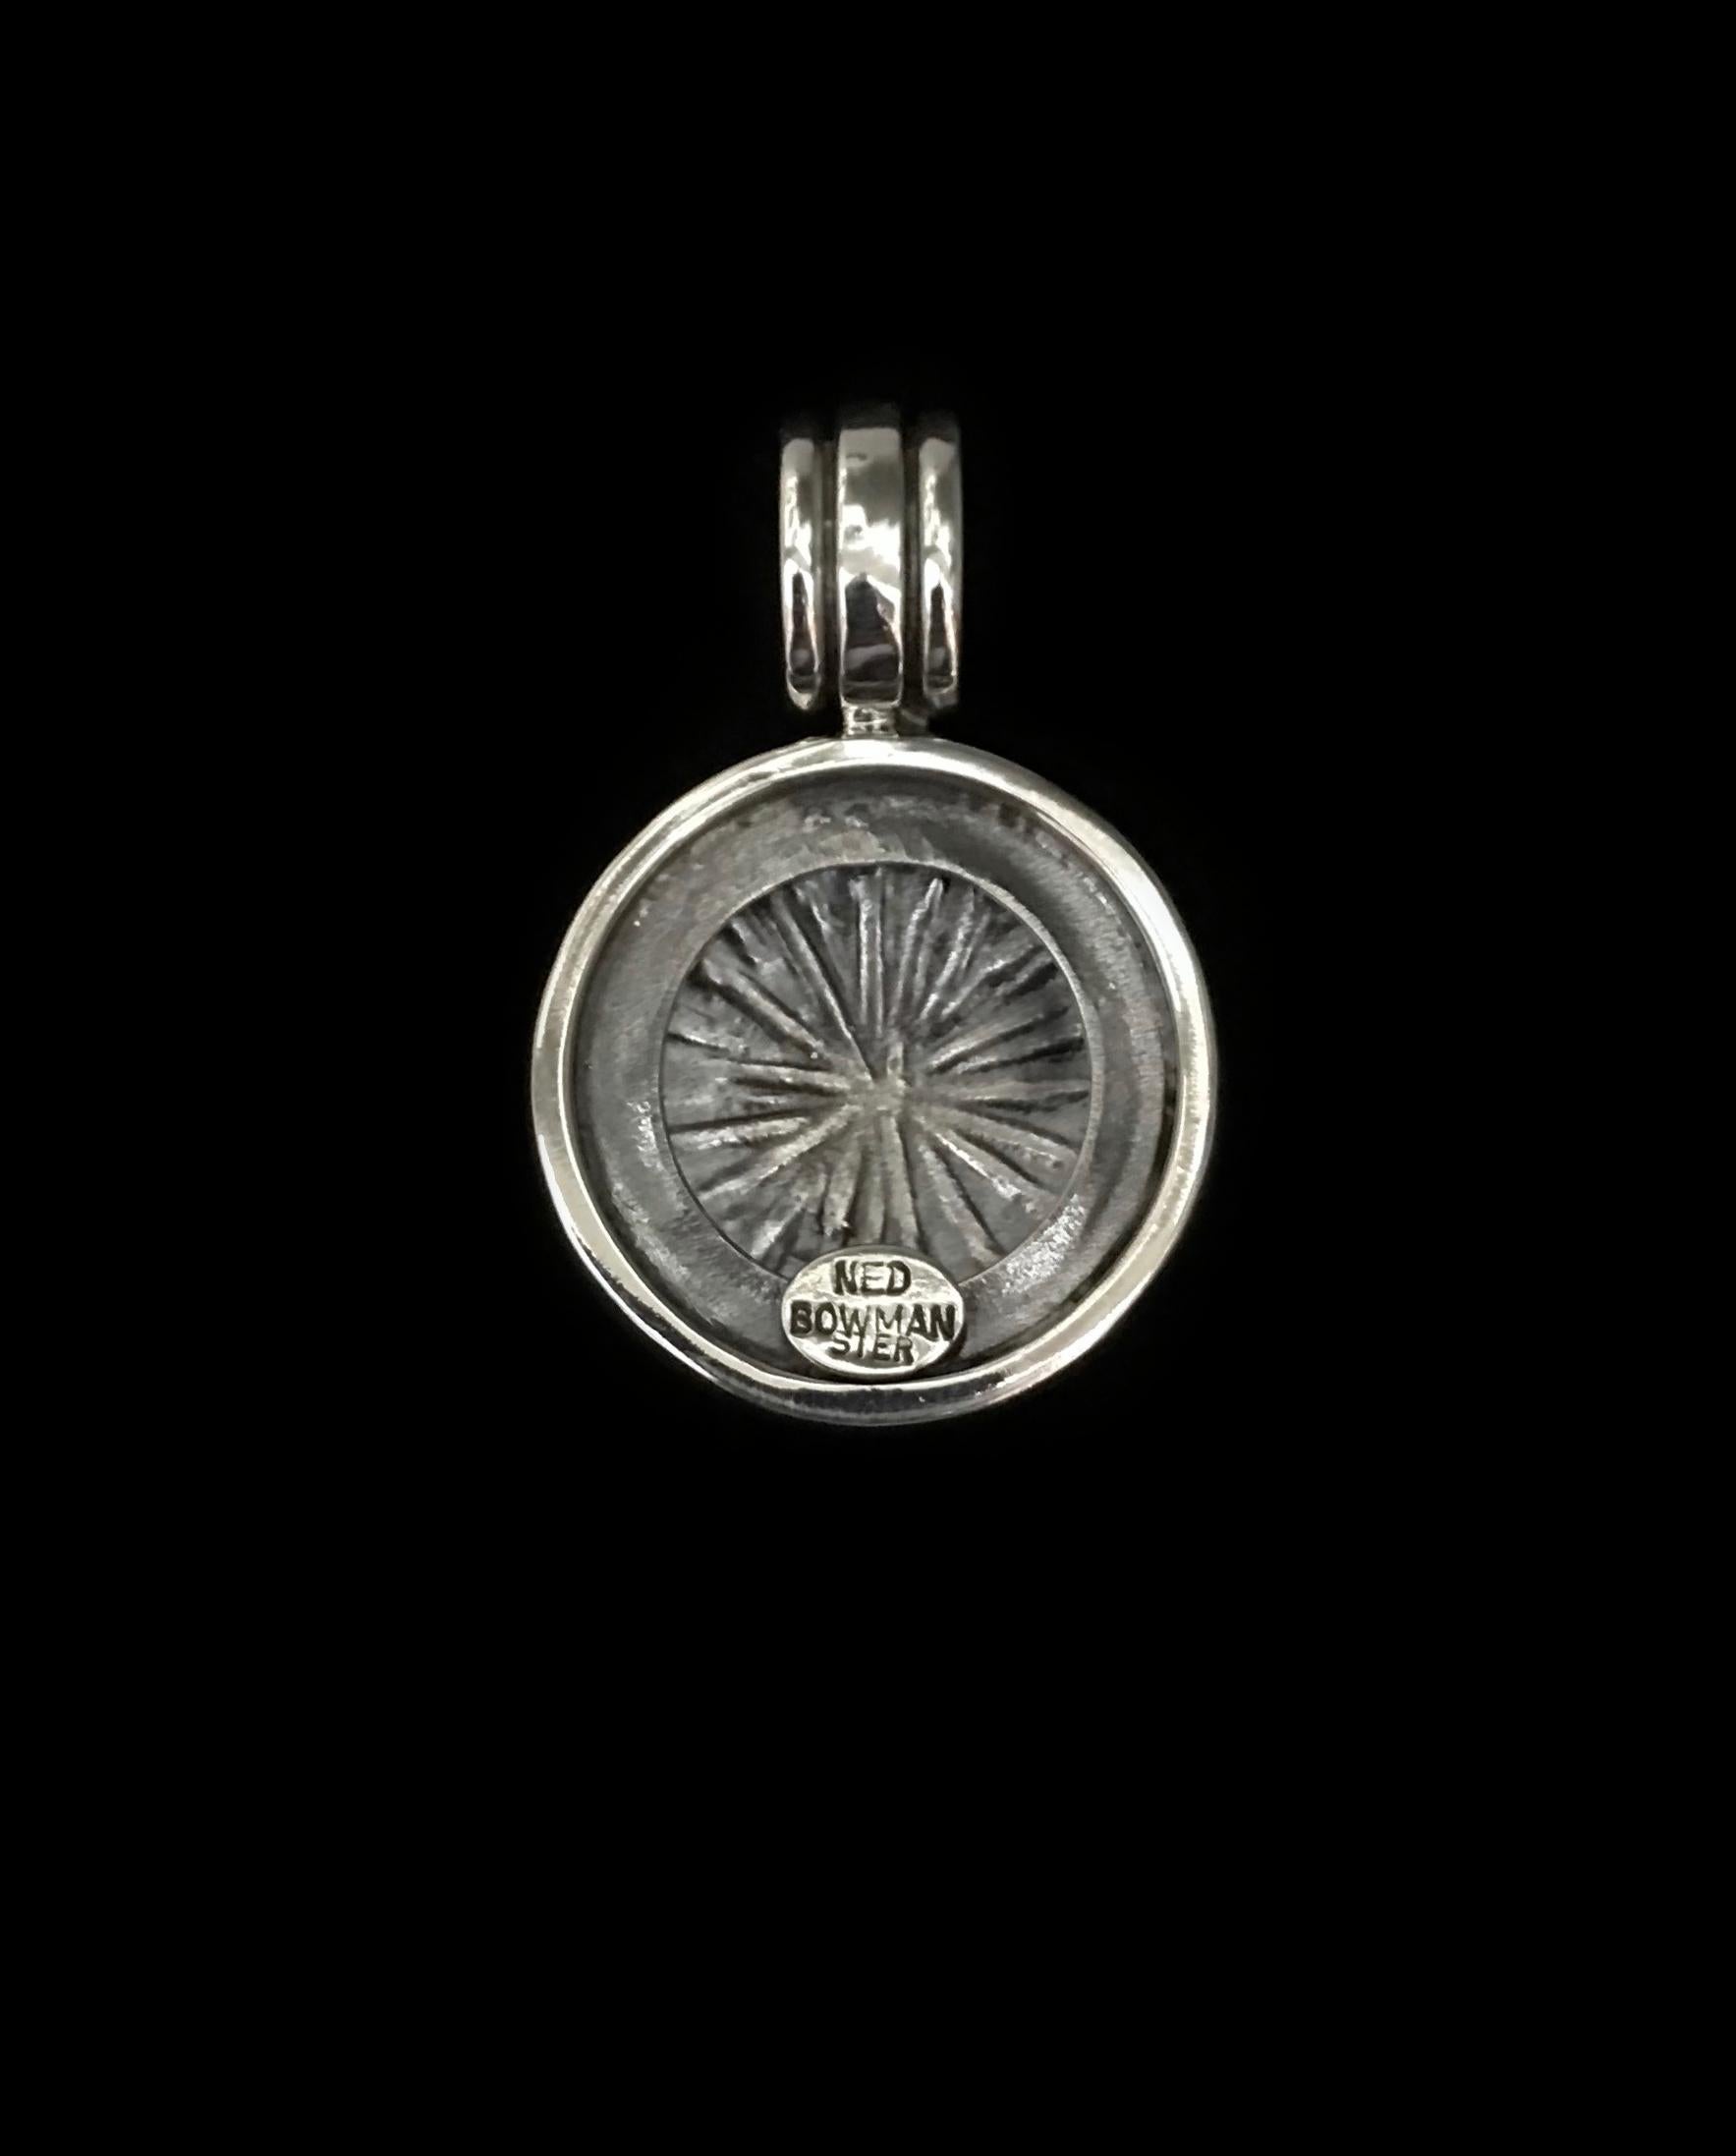 Handmade Sun Dial Pendant In New Condition For Sale In Sarasota, FL